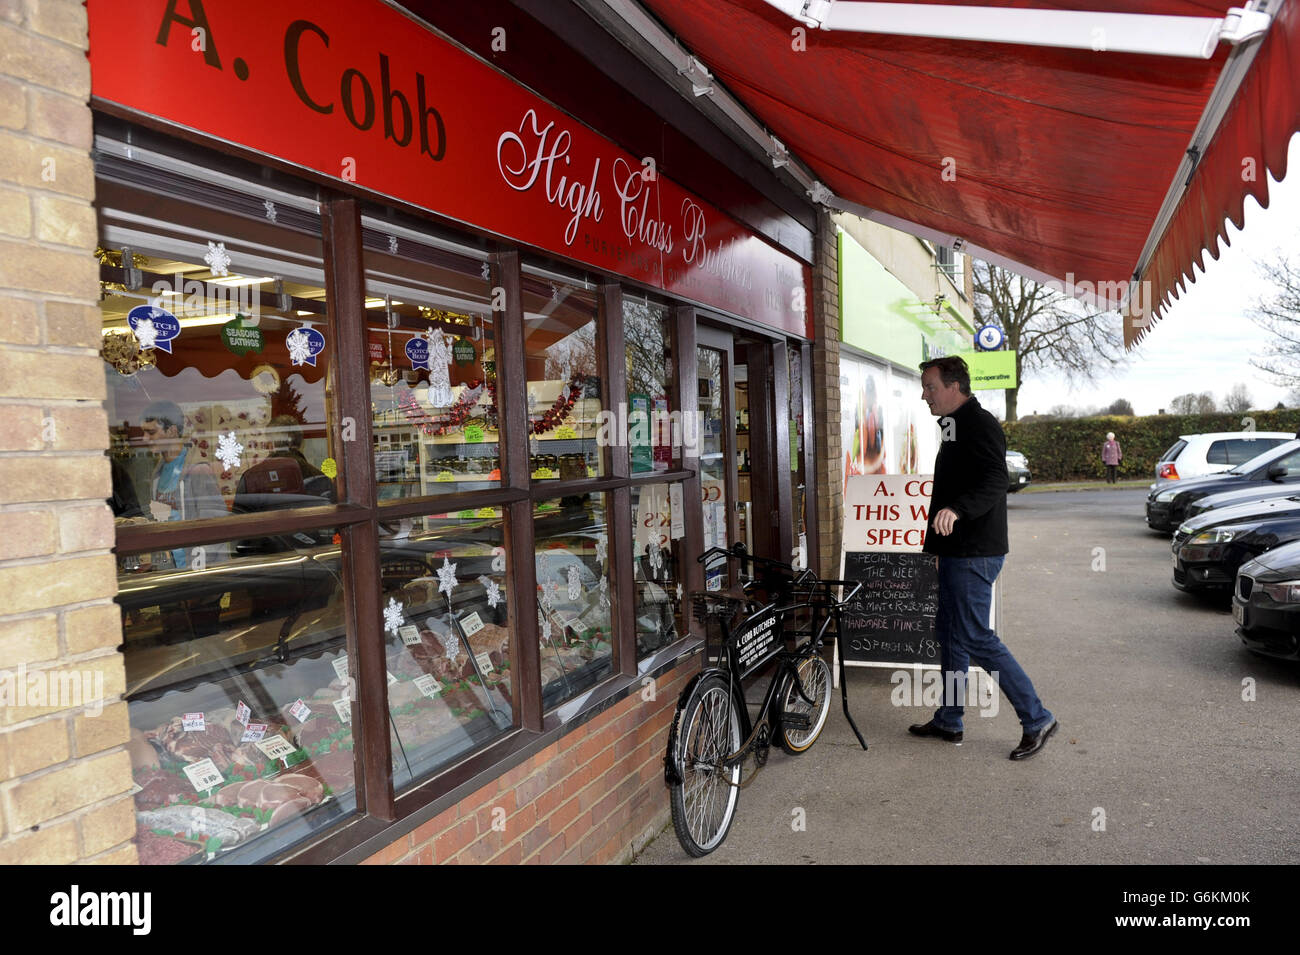 Prime Minister David Cameron enters a family butchers, A Cobb in Aylesbury, Buckinghamshire, as he marks 'Small Business Saturday' an initiative designed to encourage people to use local shops and businesses. Stock Photo